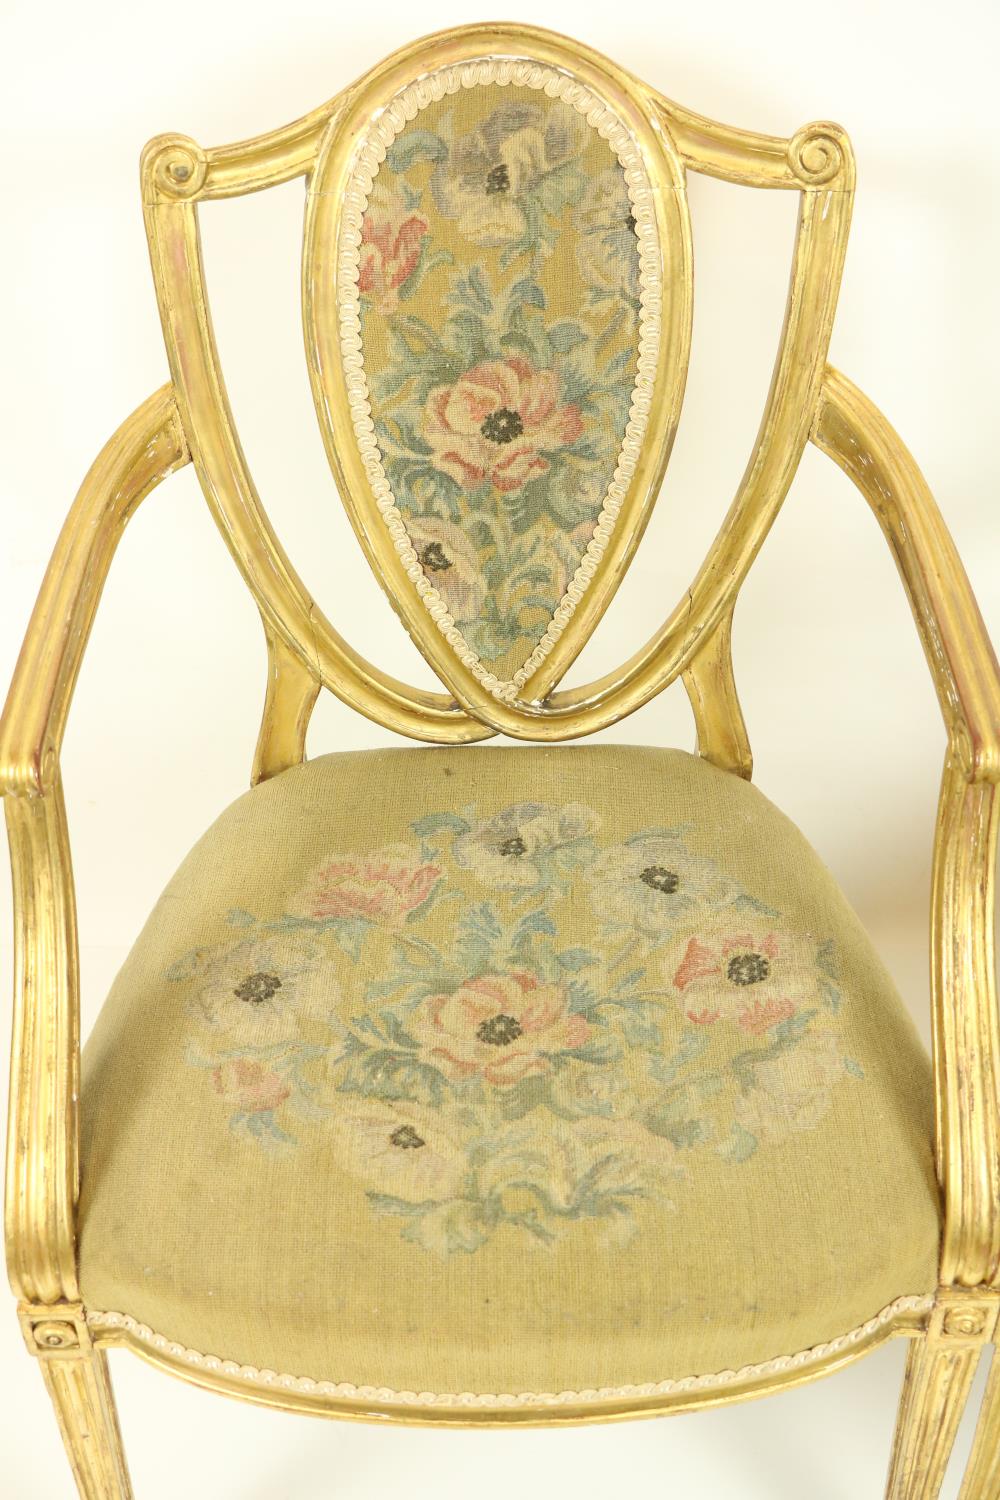 A fine set of four Regency gilt Open Armchairs, in the manner of James Wyatt (1746-1813), each - Image 5 of 7